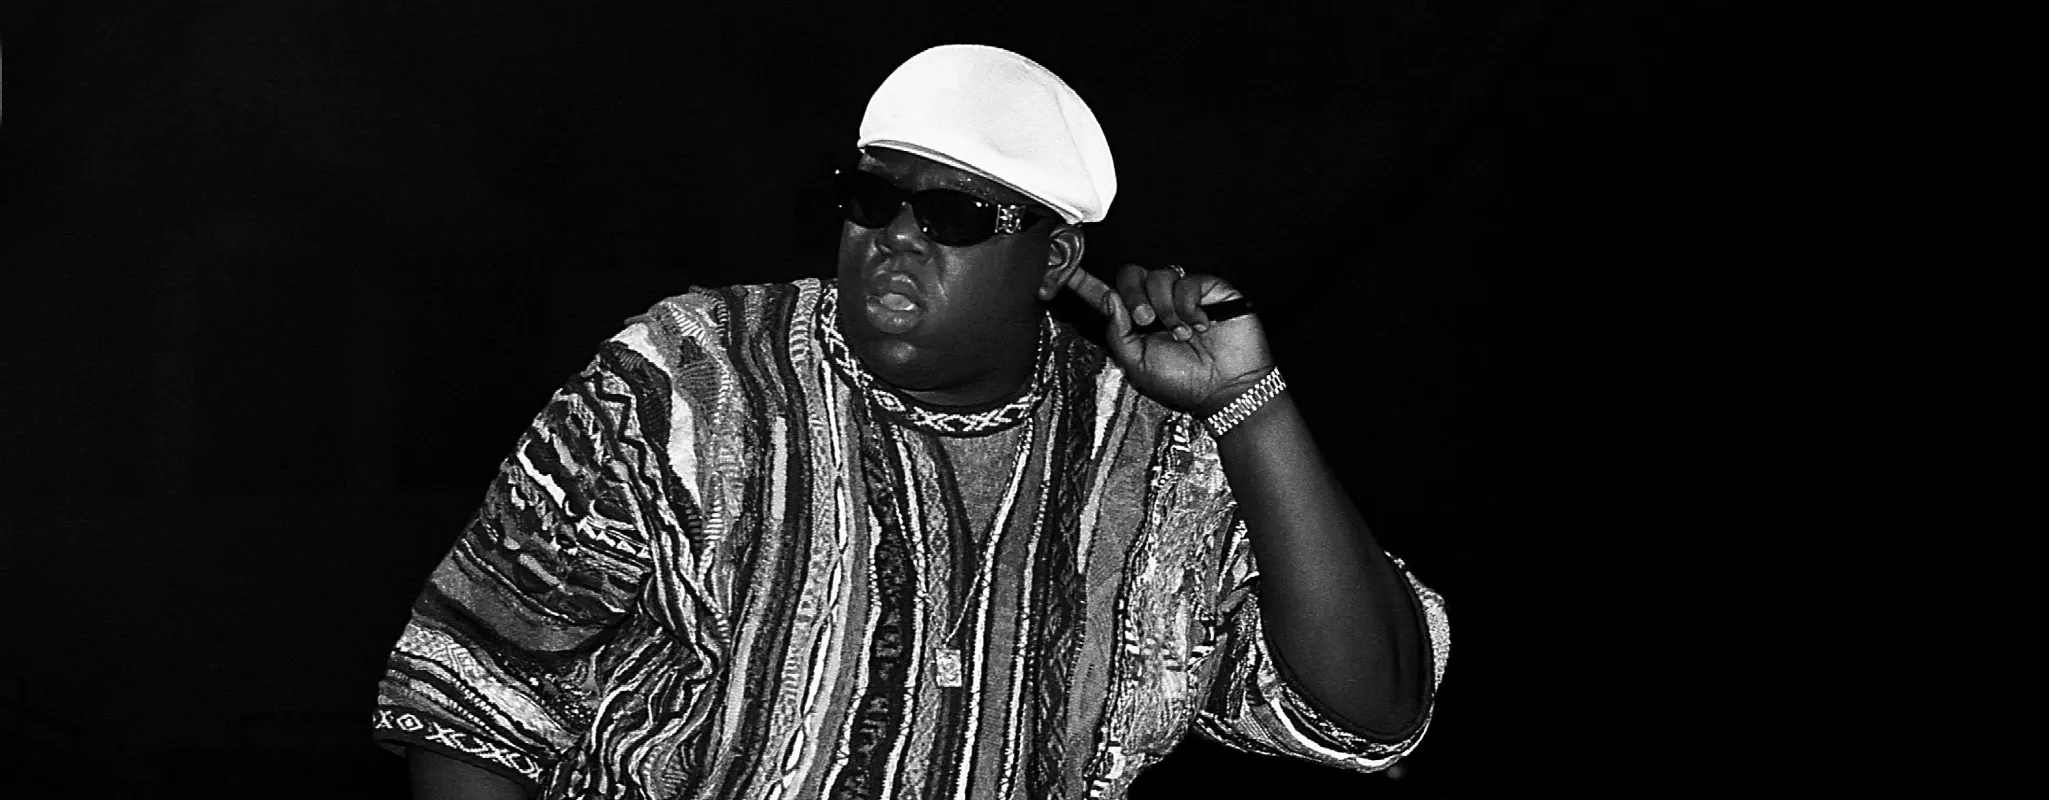 Top 10 Songs by The Notorious B.I.G.